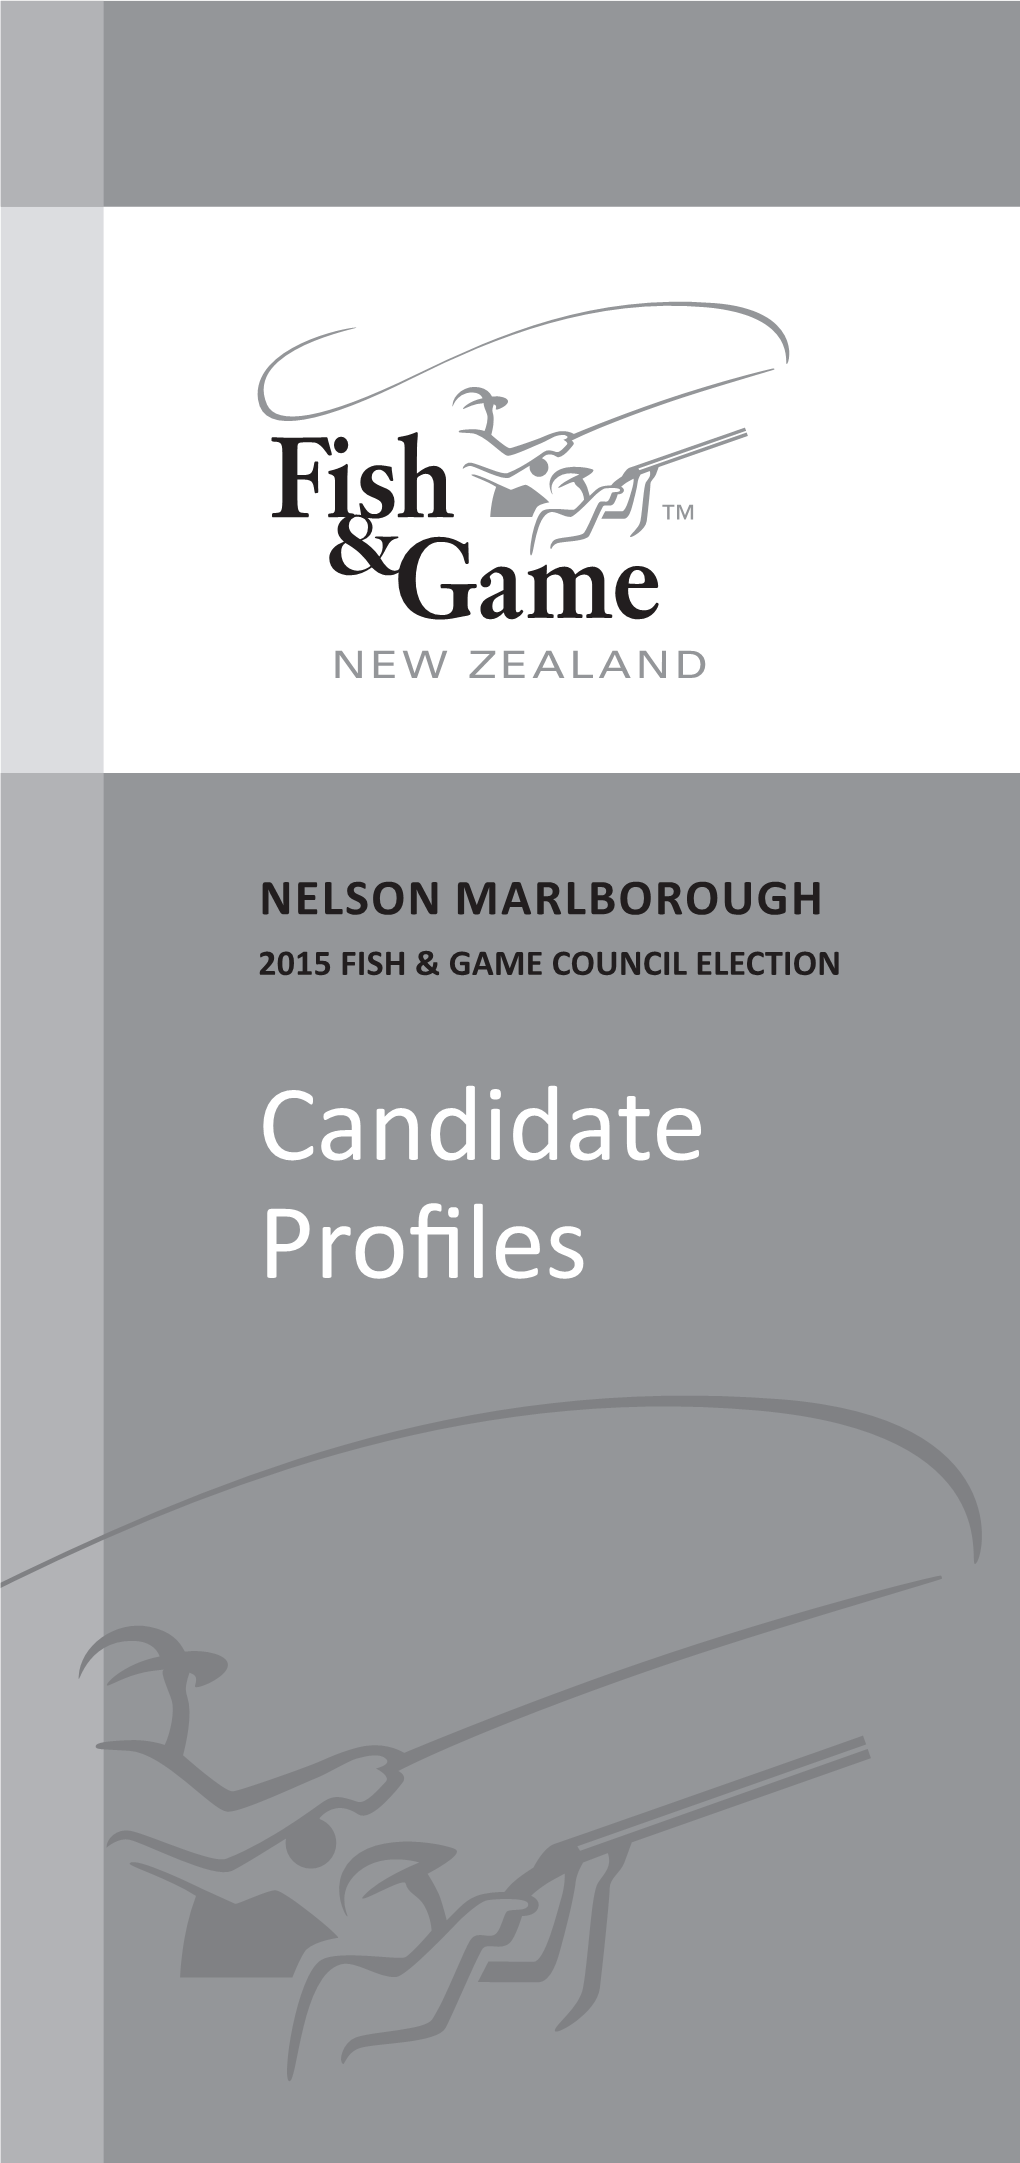 Candidate Profiles